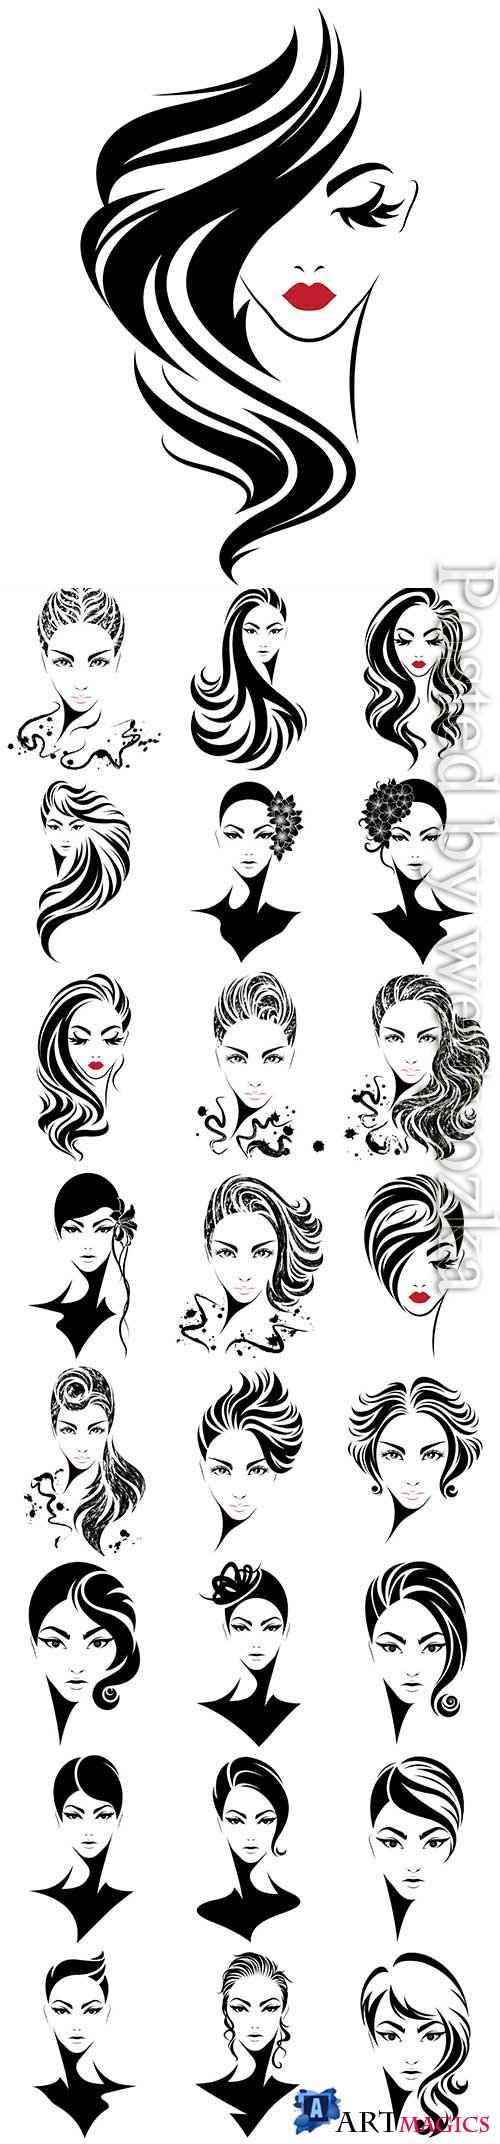 Girls with different hairstyles in vector